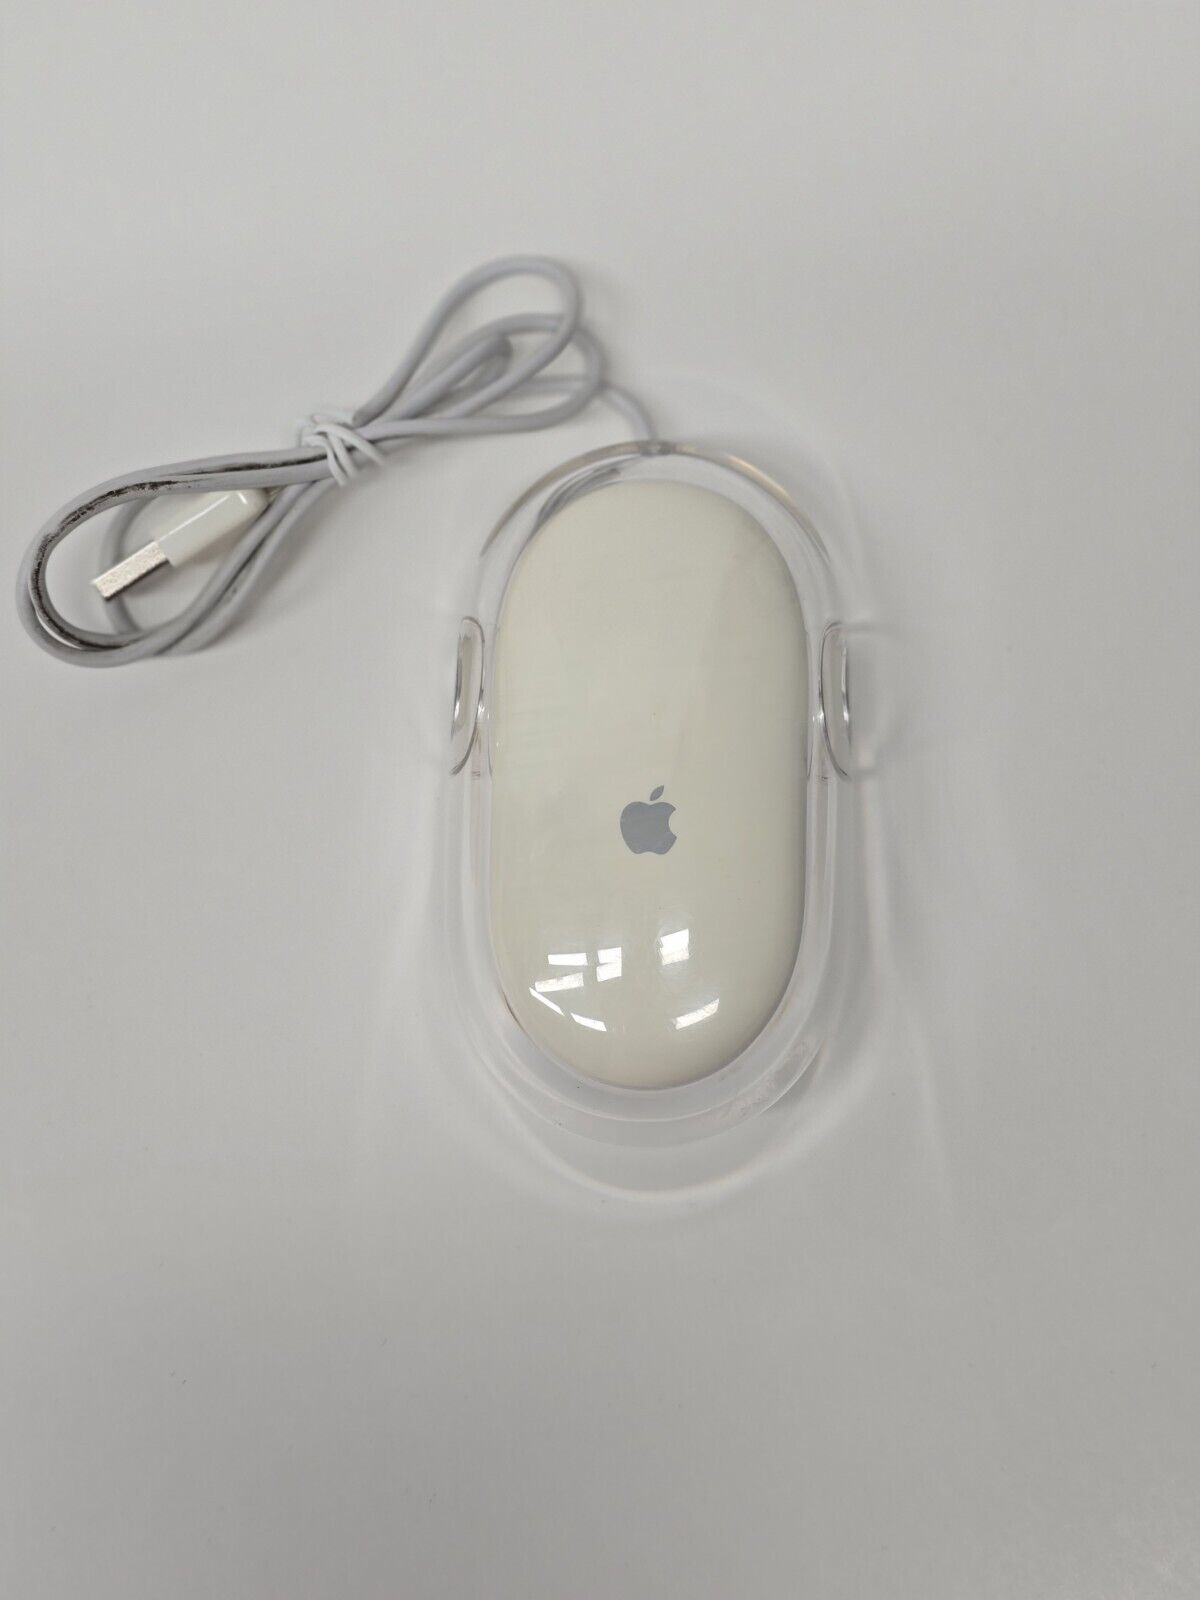 Apple Mac Pro Mouse Genuine Wired Optical M5769 Clear White -Free Fast Shipping